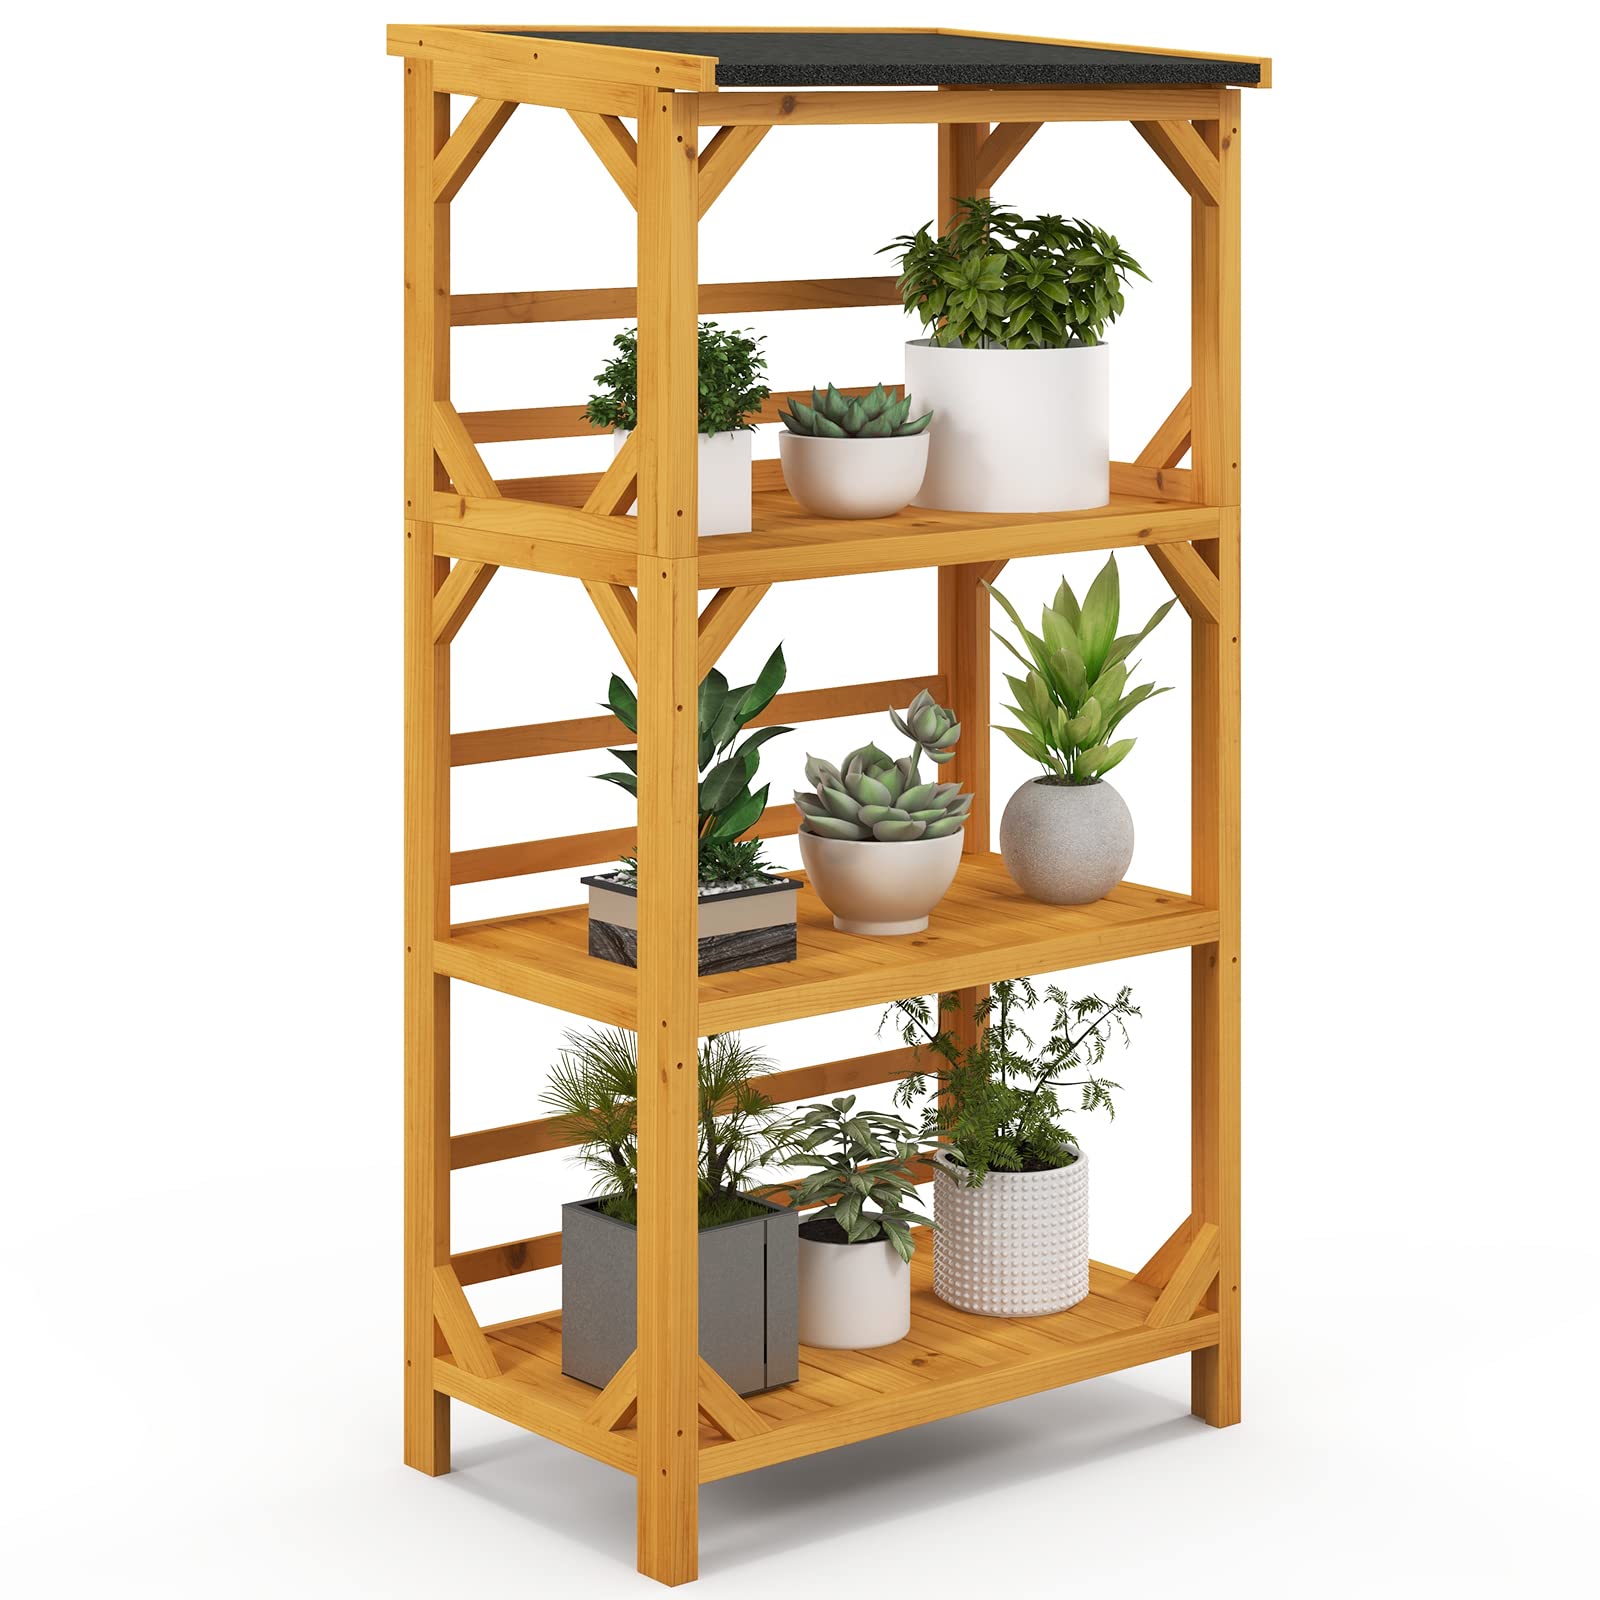 Giantex Plant Stand with Roof - 54'' Outdoor Storage Shelves, 3-Tier Wooden Plant Rack with Weatherproof Asphalt Roof